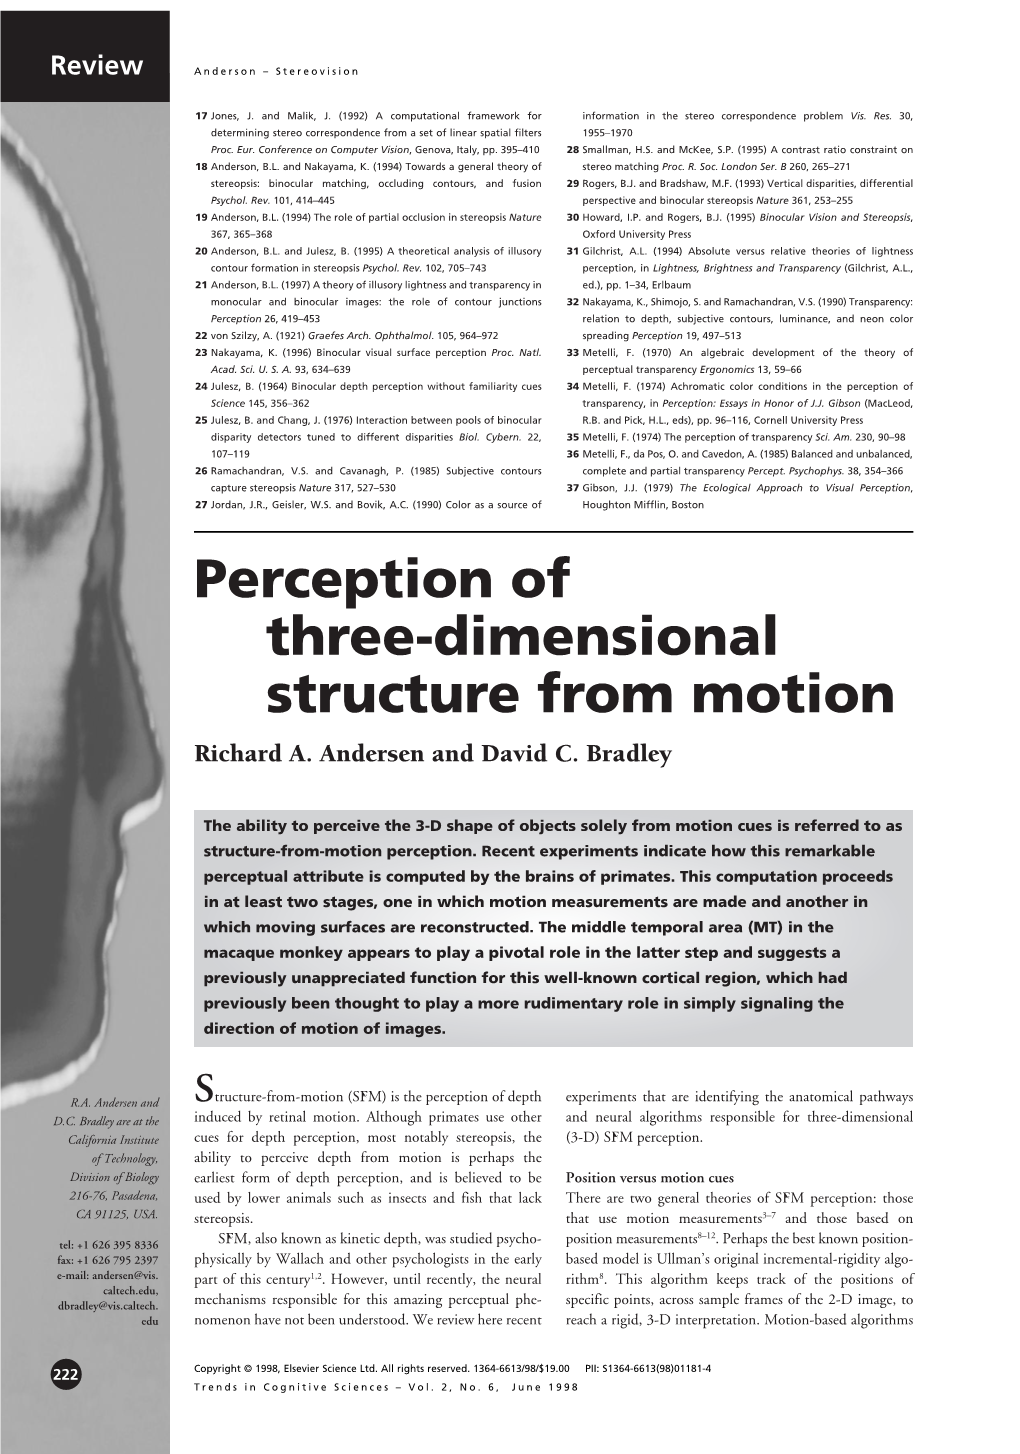 Perception of Three-Dimensional Structure from Motion Richard A